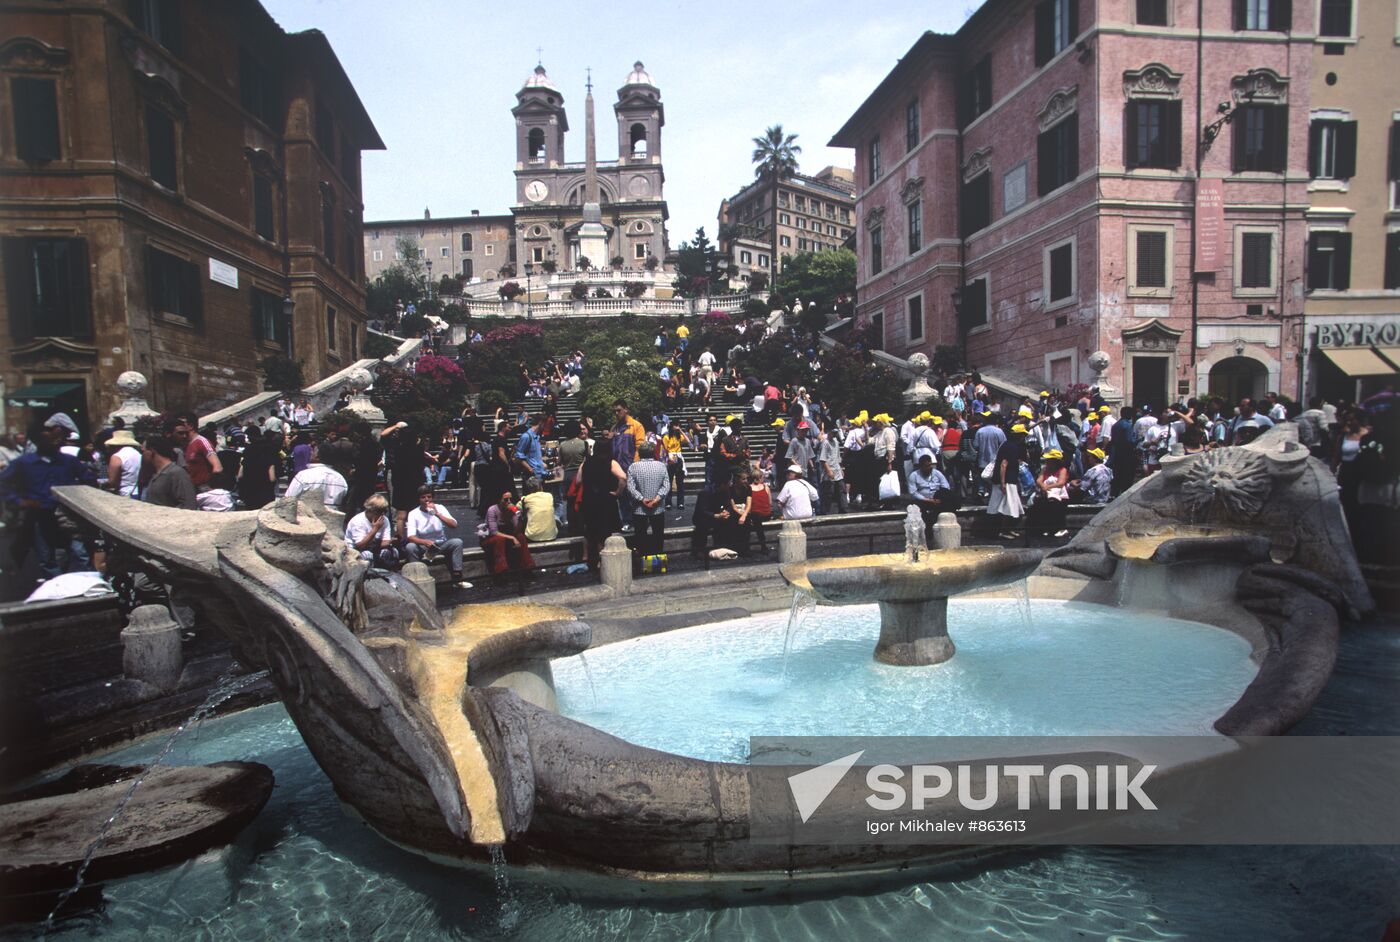 Rome, the capital of Italy. Square of Spain: Spanish Steps